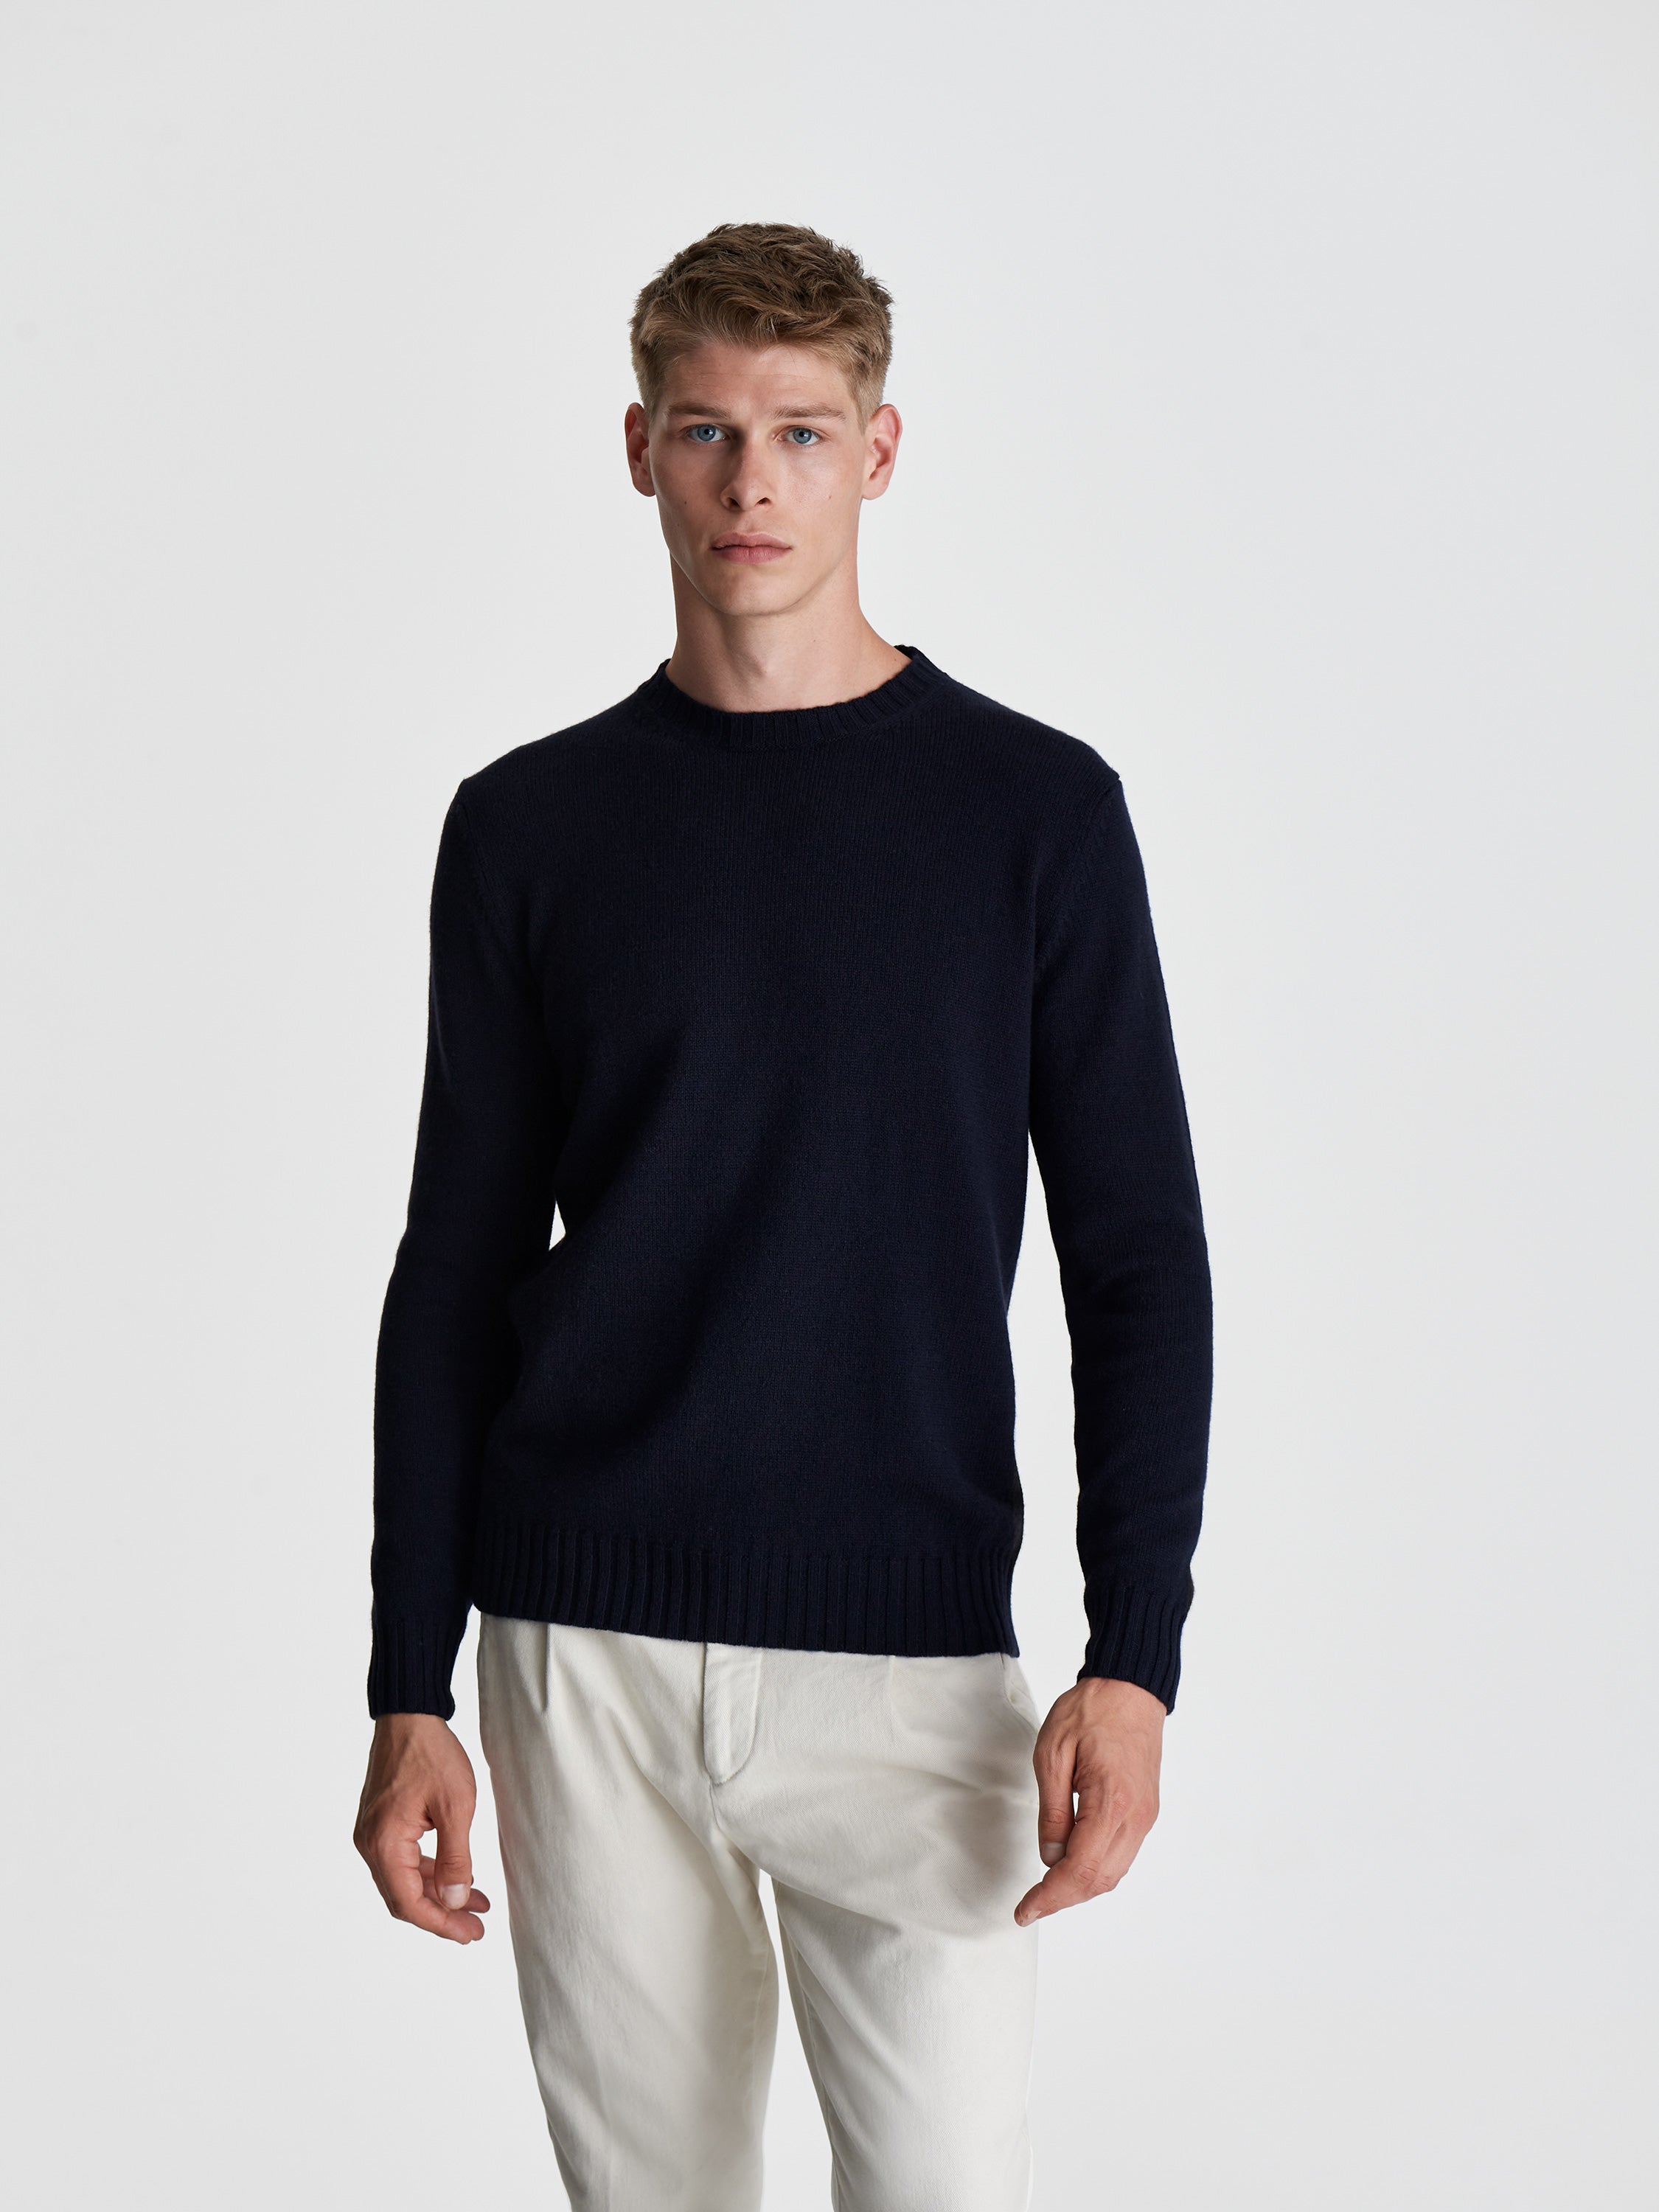 Cashmere Crew Neck Sweater Navy Cropped Model Image